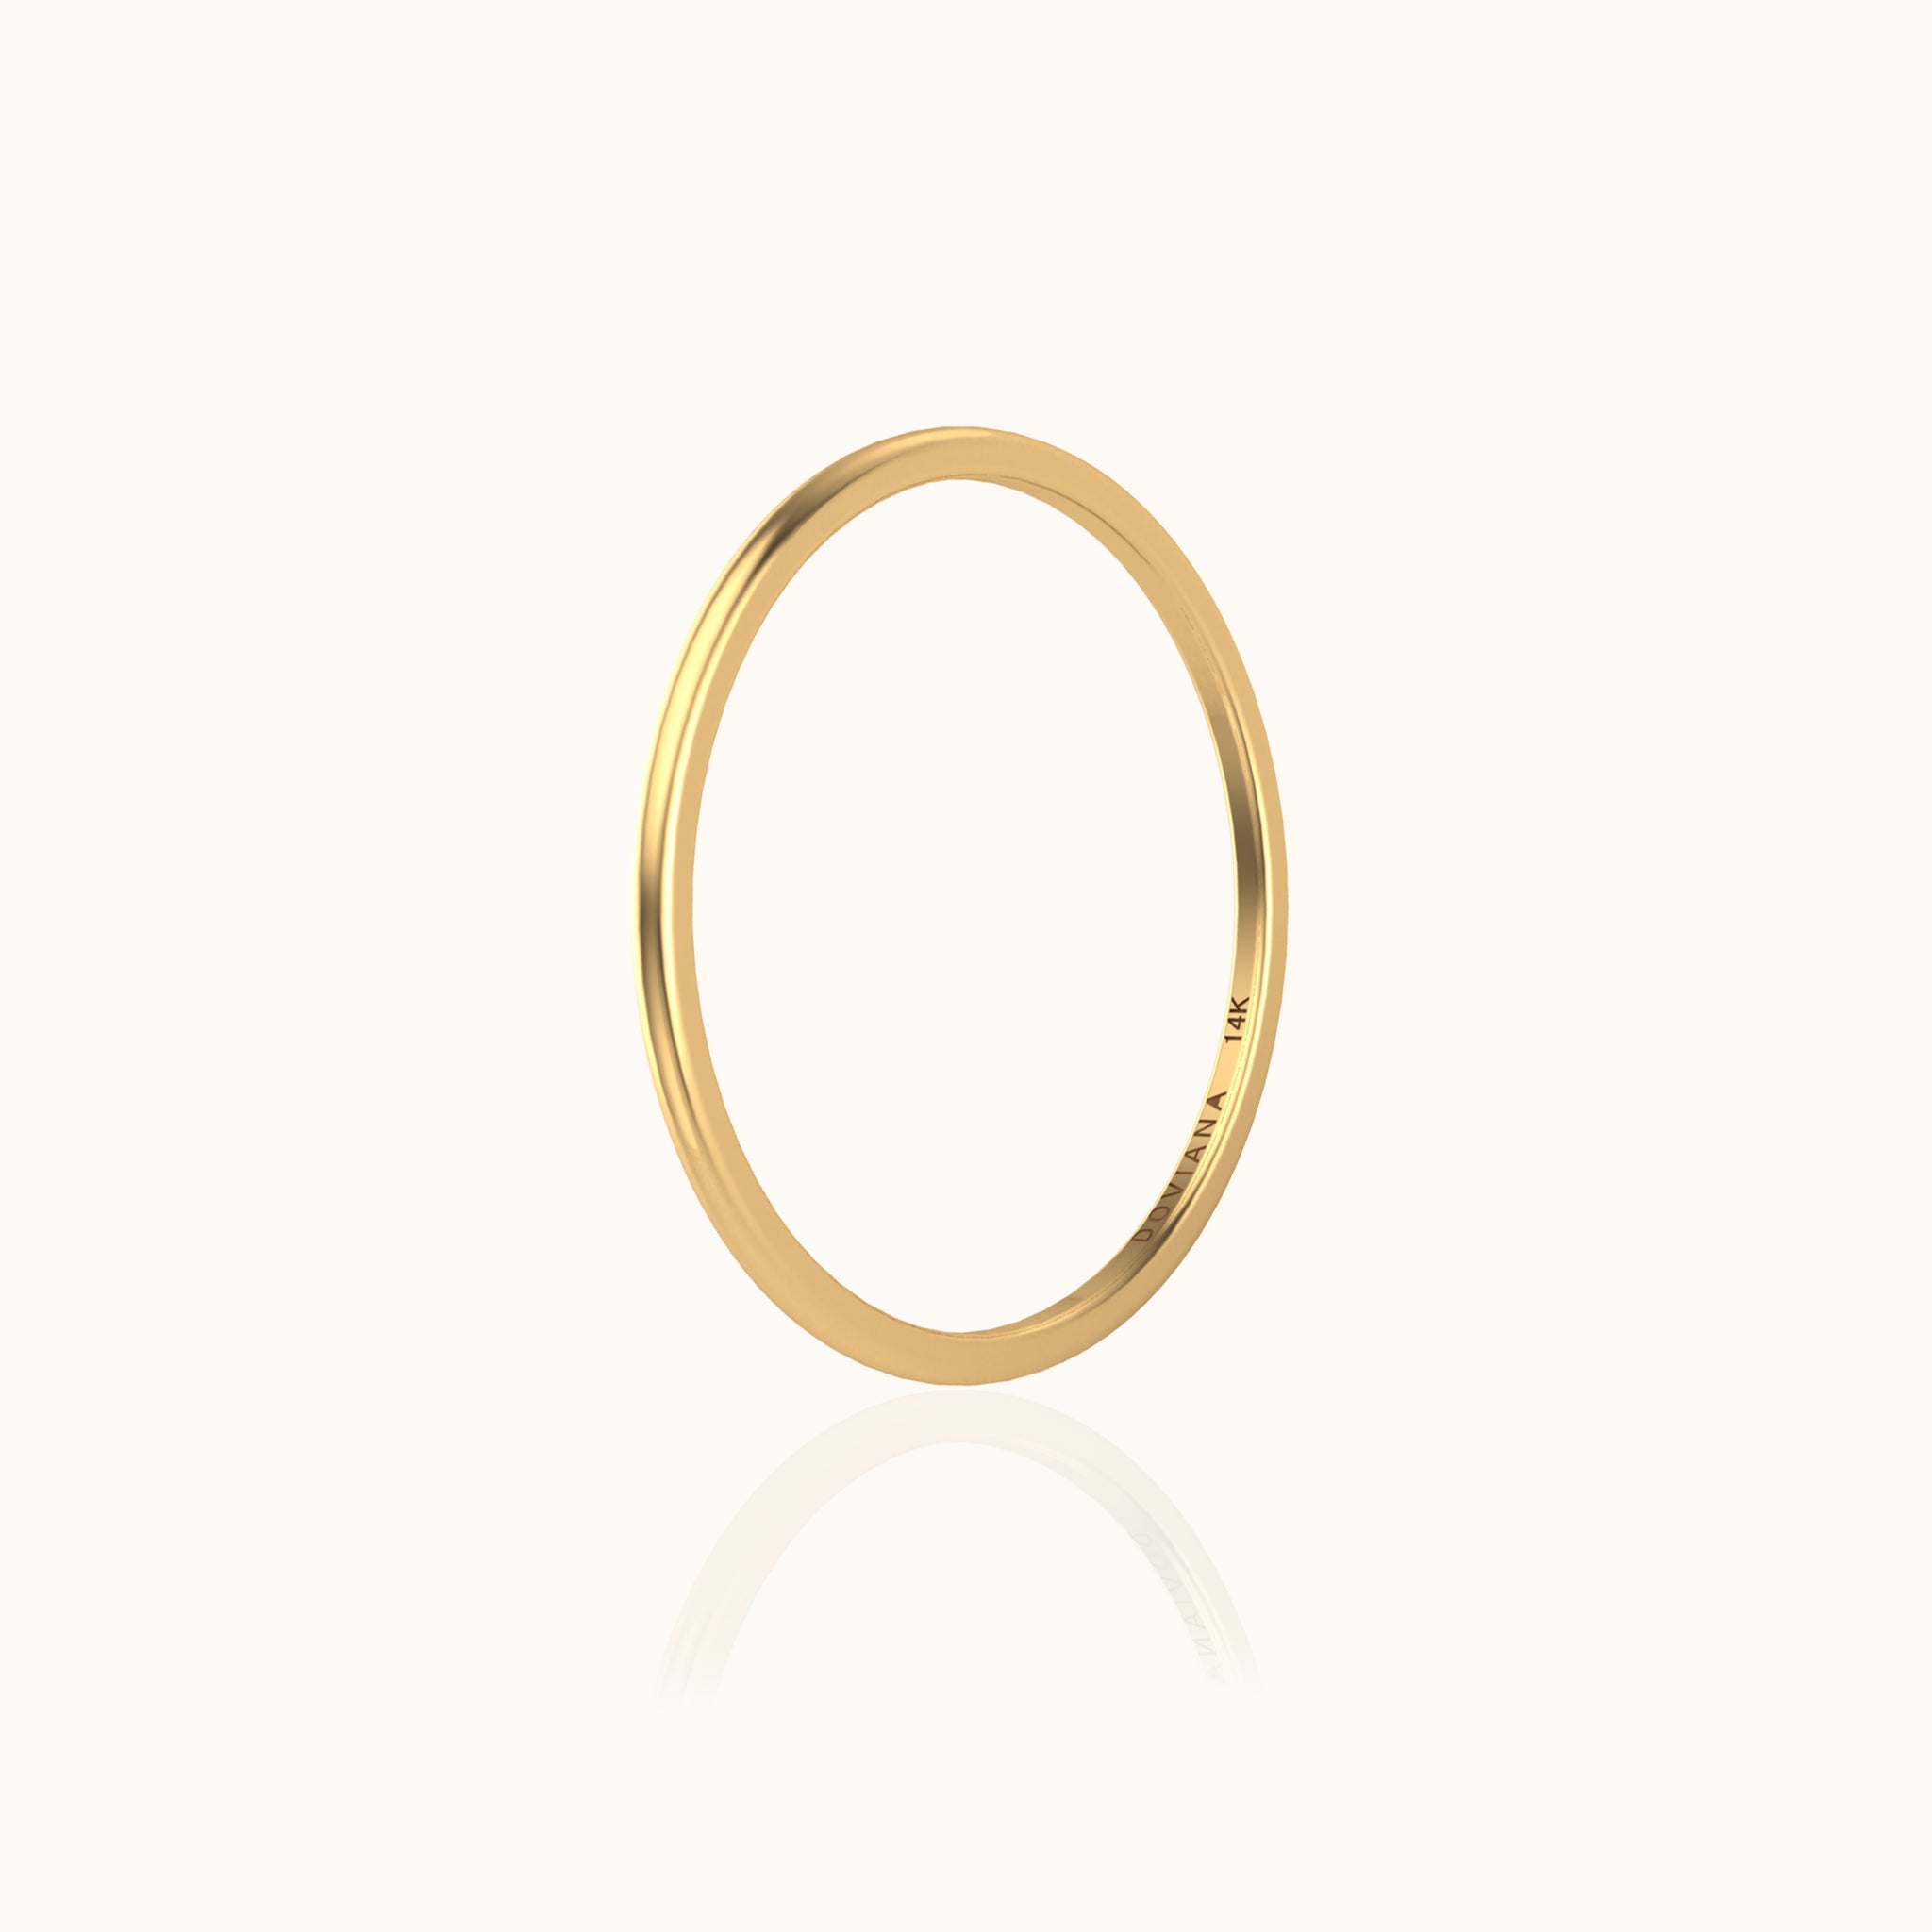 14K Solid Gold Eternal Simple Thin Stacking Band Ring Daily Essentials by Doviana